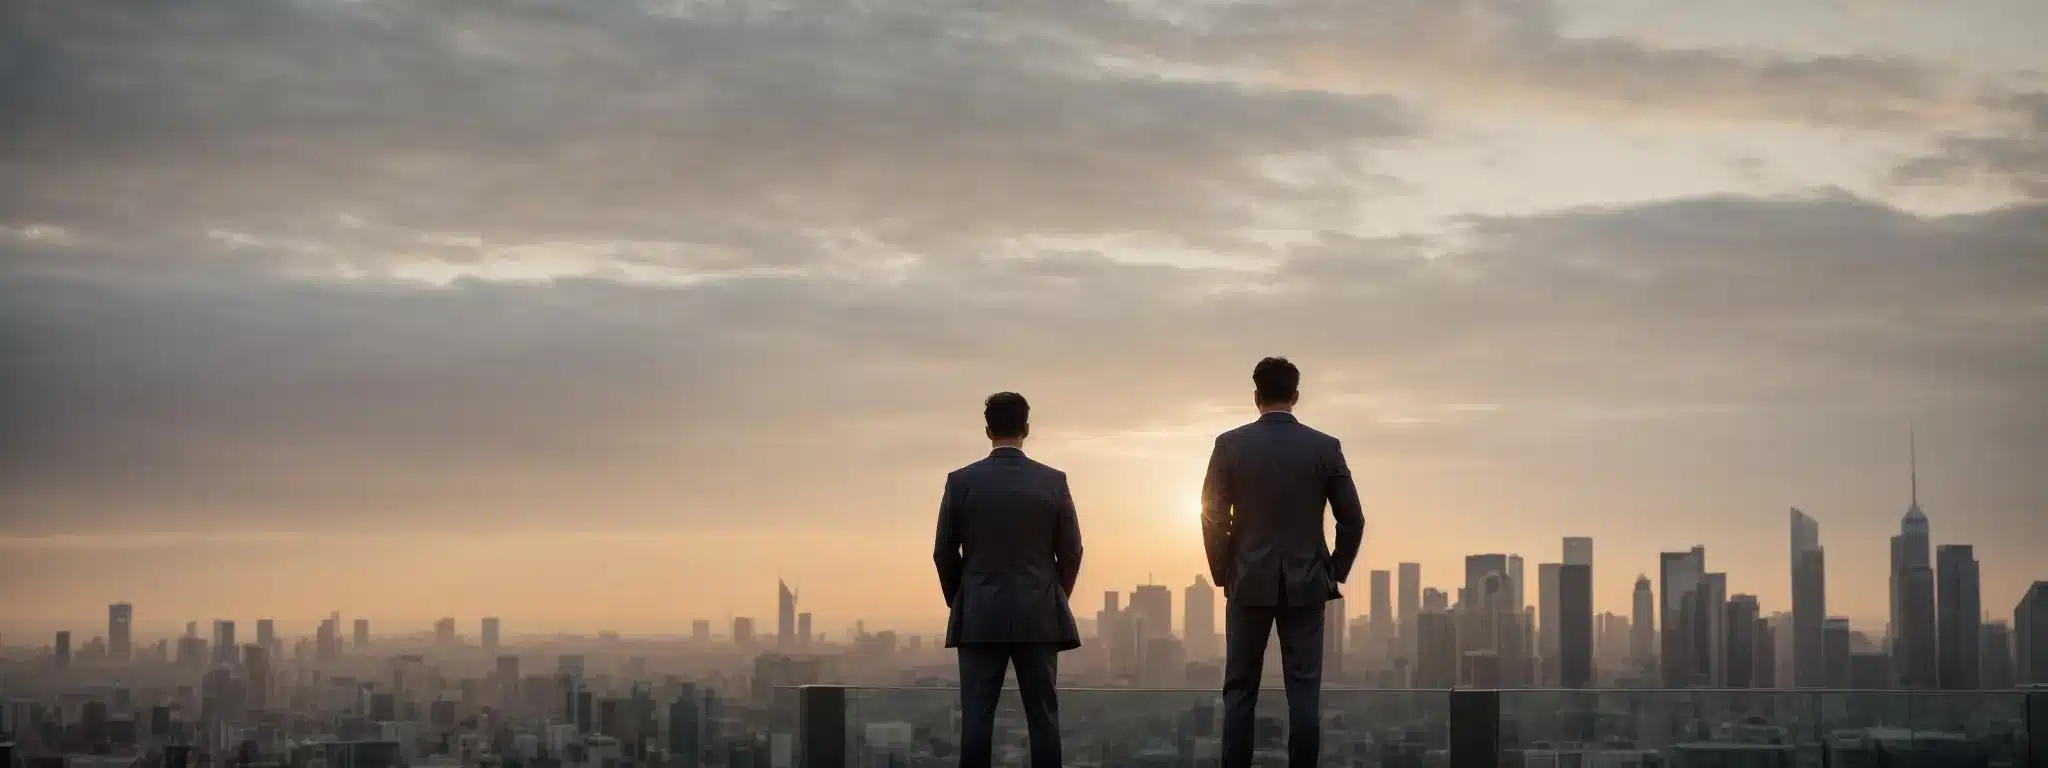 A Visionary Entrepreneur Gazes Out Over A City Skyline At Dawn, Symbolizing The Shaping Of A Brand'S Future Through Insightful Equity Measurement.